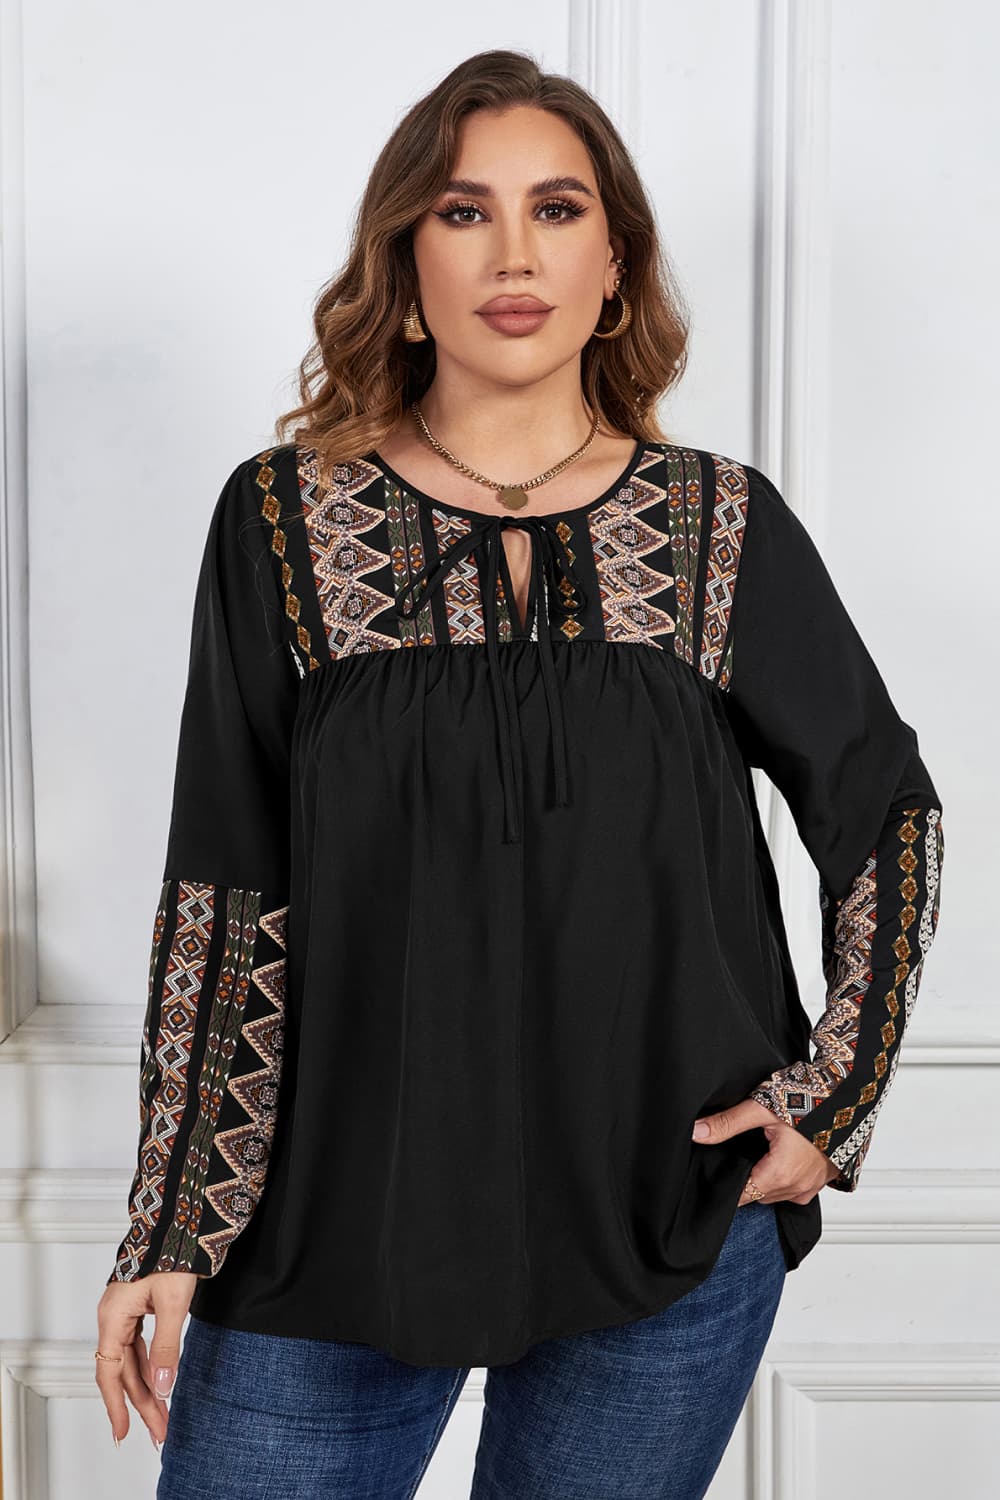 Melo Apparel Plus Size Printed Round Neck Tie Front Blouse